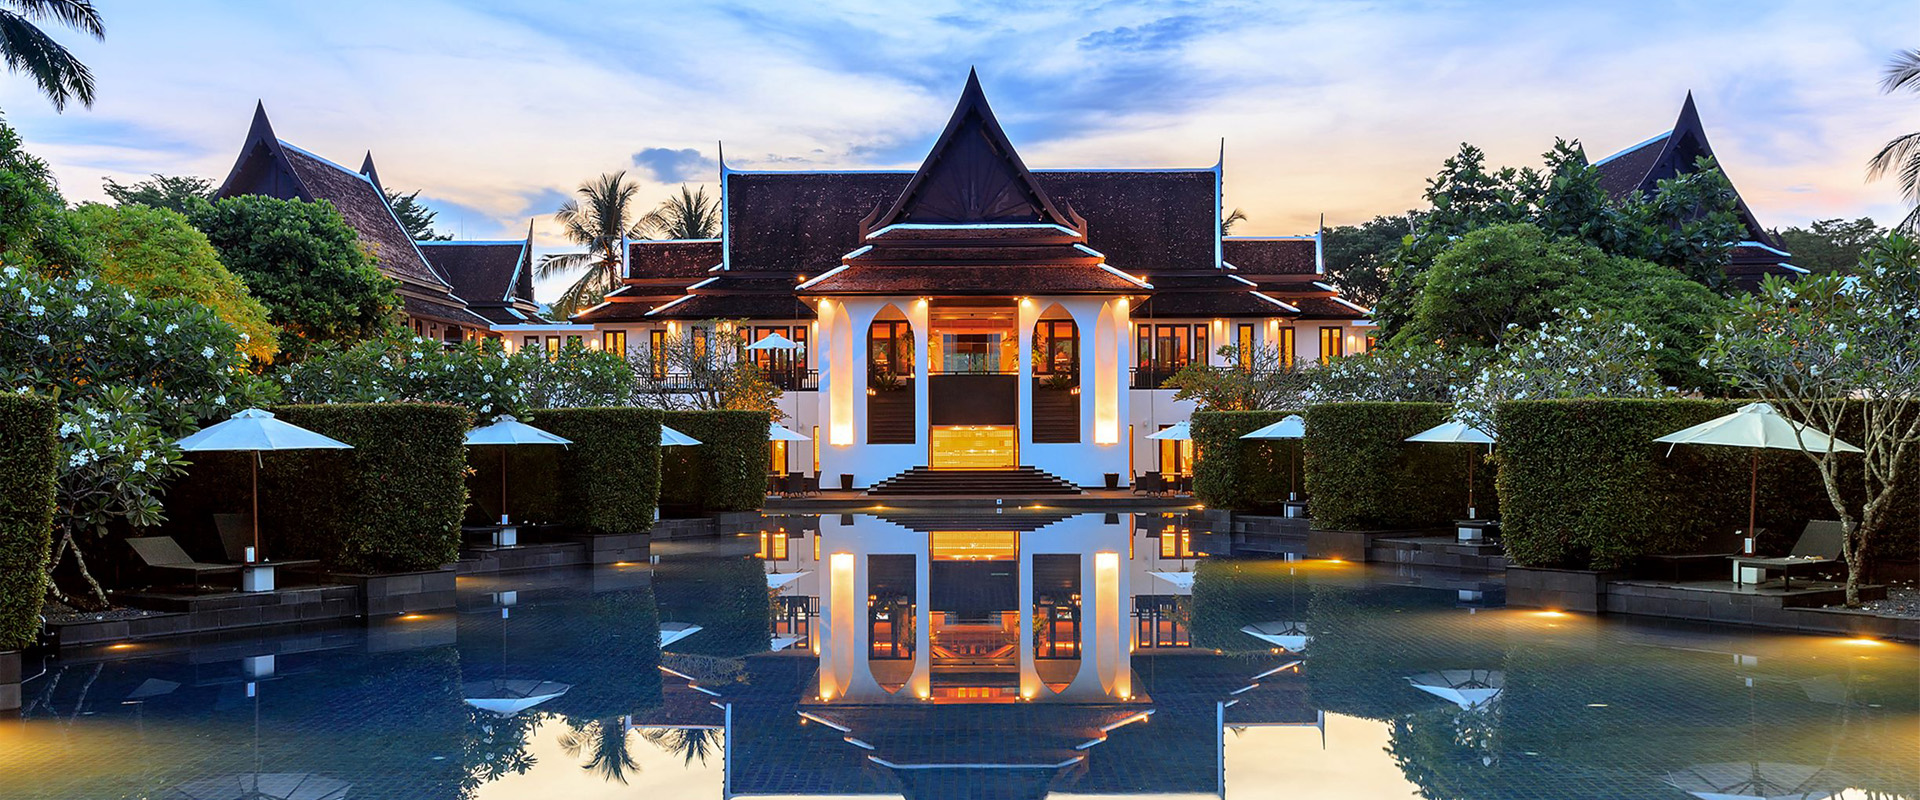 Four Seasons Resort Chiang Mai | Conference Venues Thailand